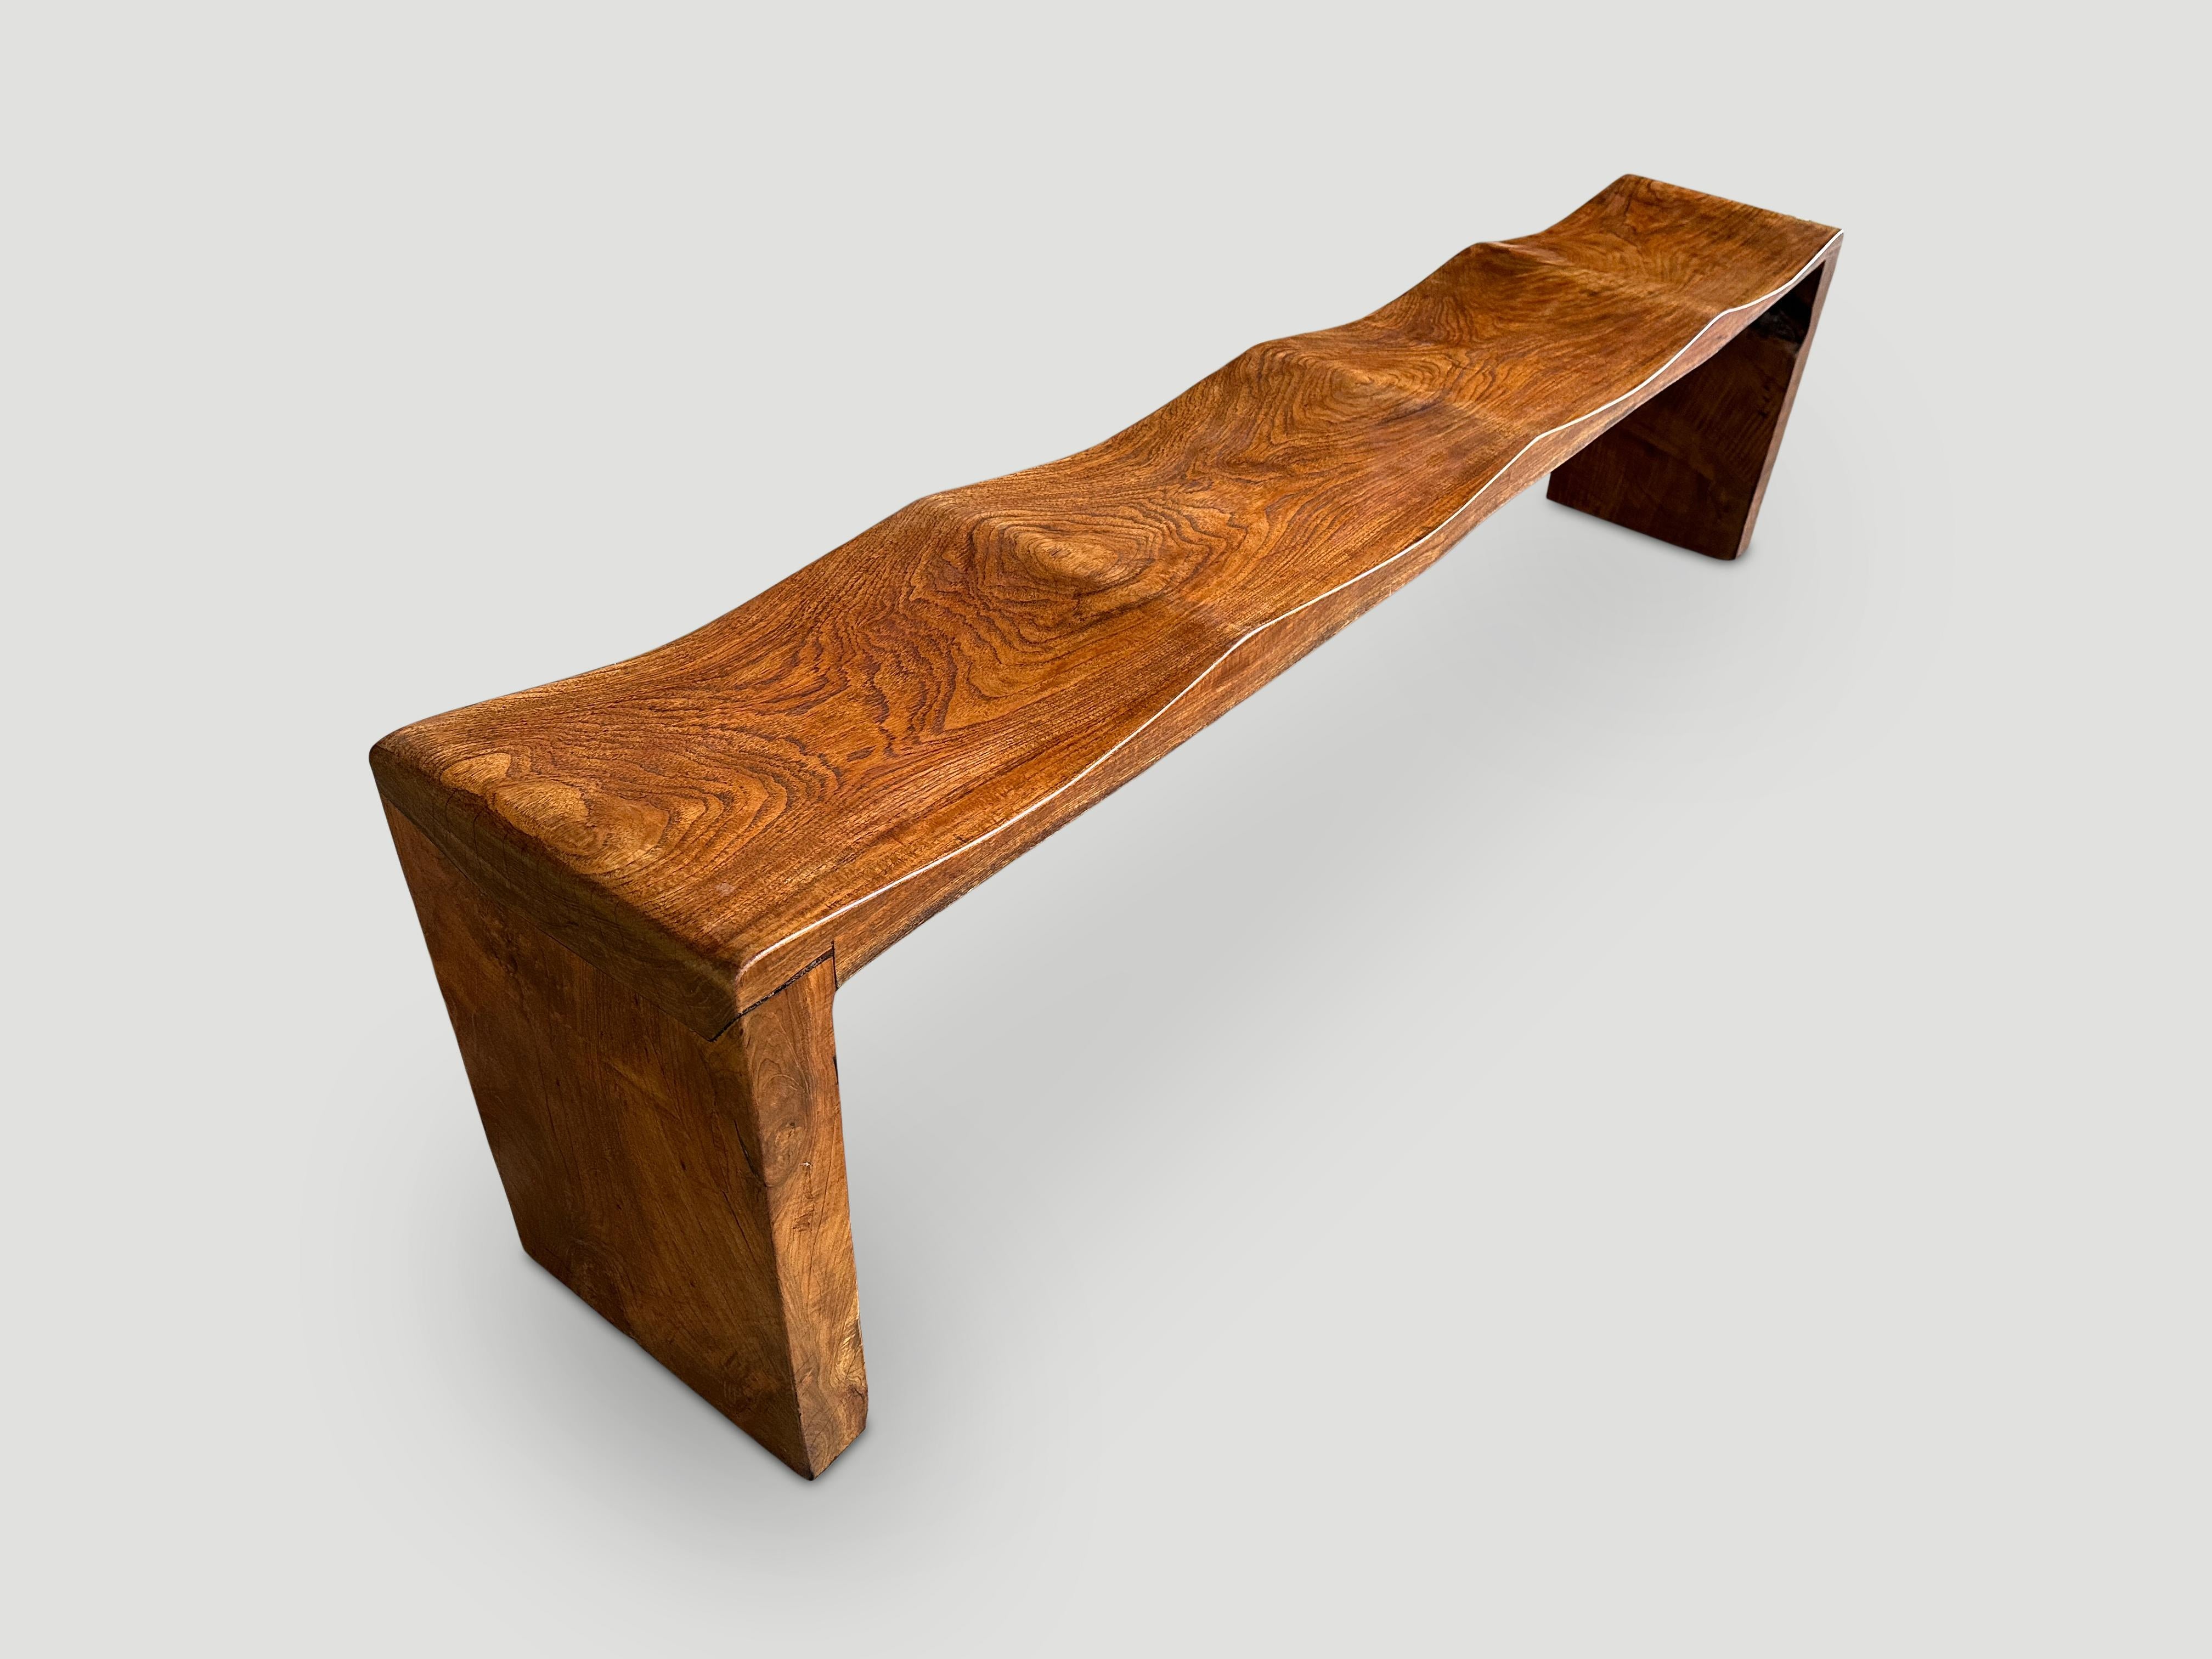 A solid single slab of reclaimed teak wood is hand carved into this stunning design with four deep waves. Finished with a natural oil revealing the beautiful wood grain. 

This bench was hand made in the spirit of Wabi-Sabi, a Japanese philosophy